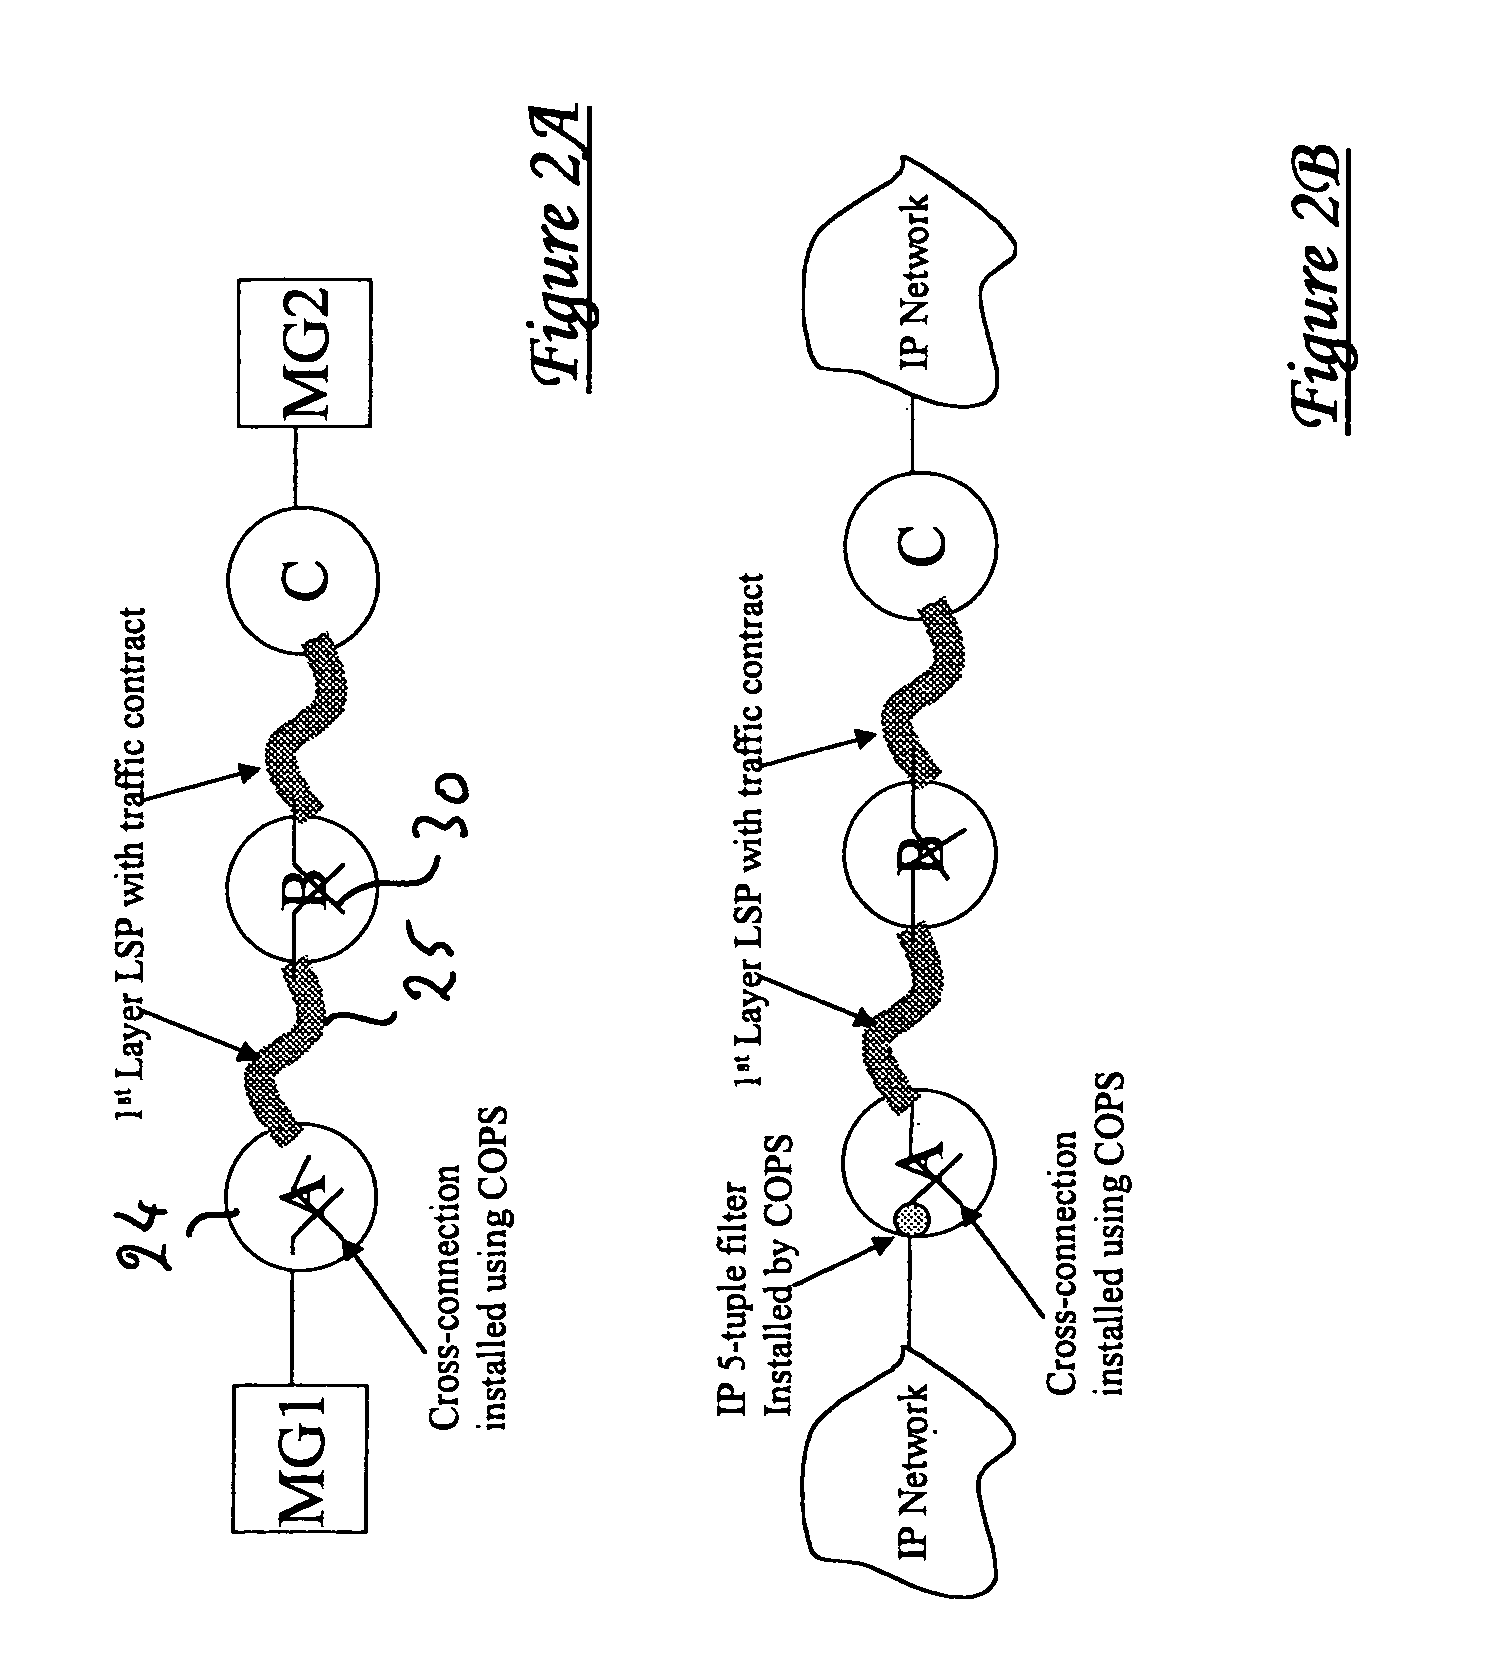 Label switched traffic routing and signaling in a label switched communication packet network